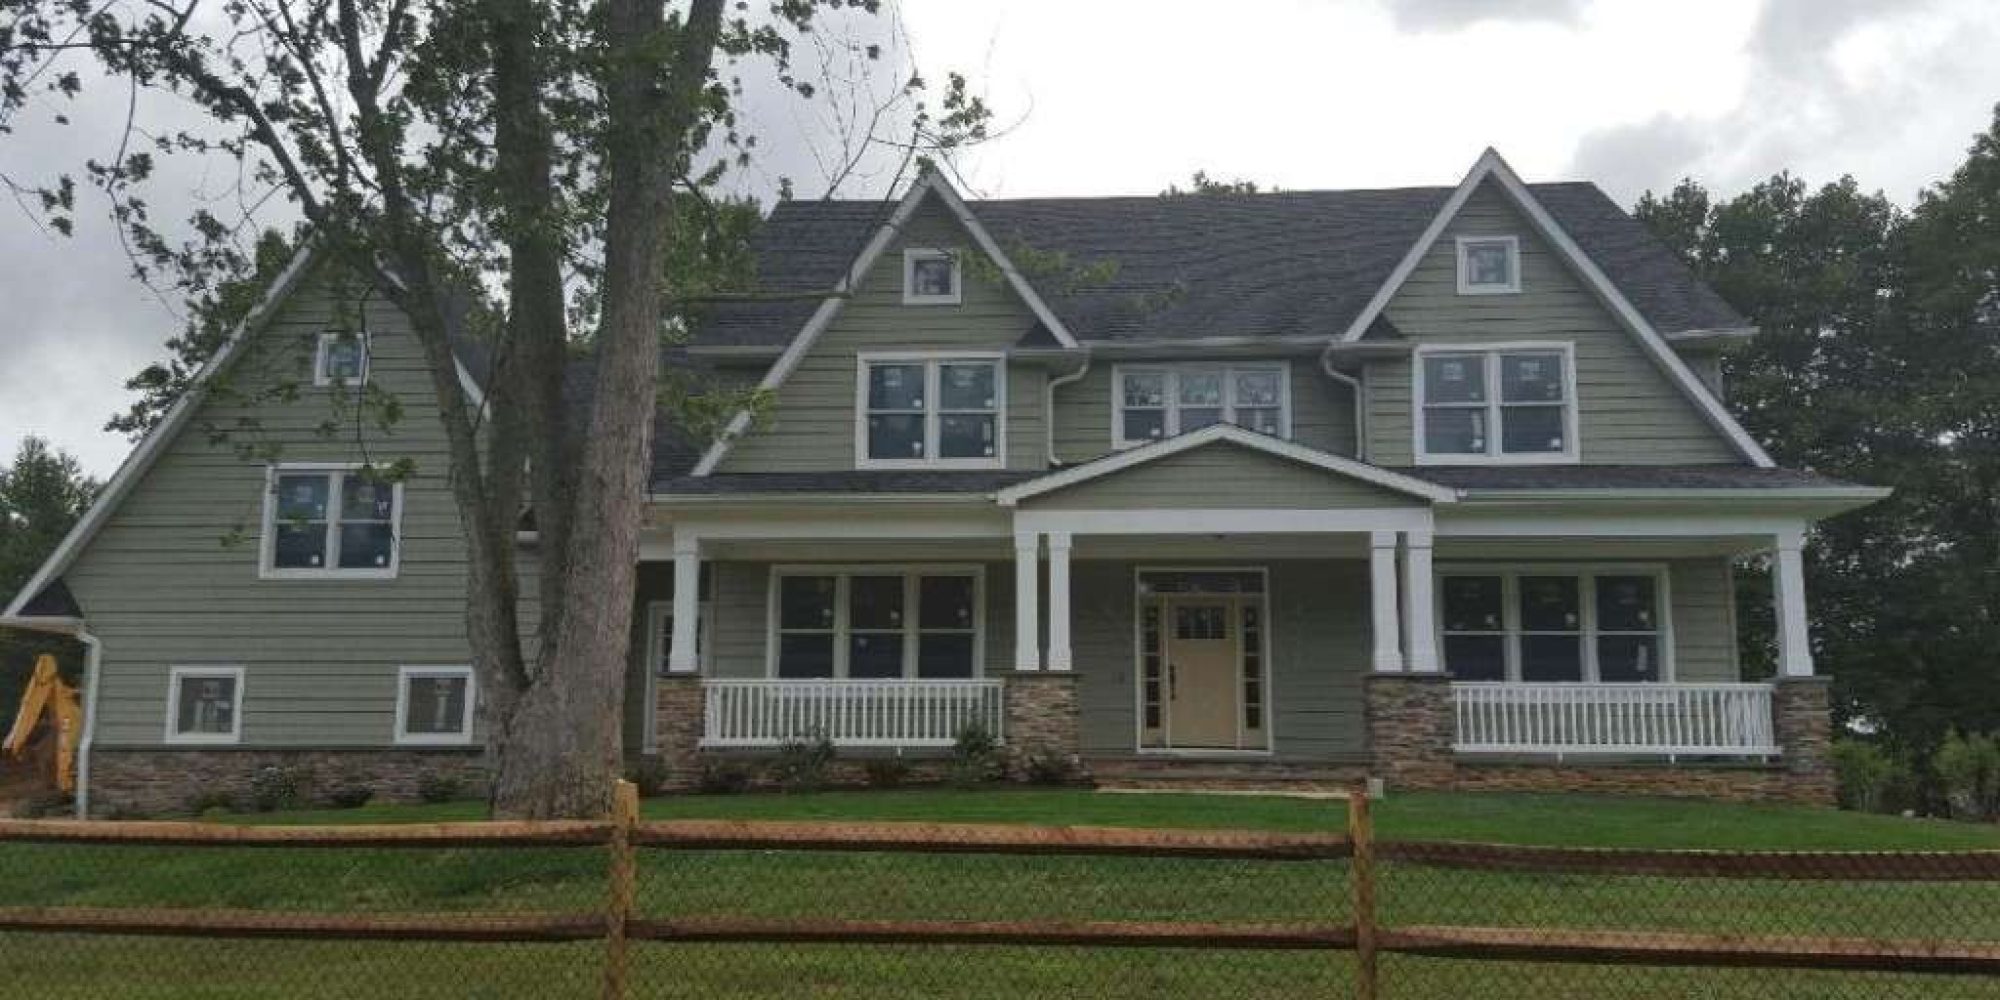 Siding Contractors in Morris County, New Jersey